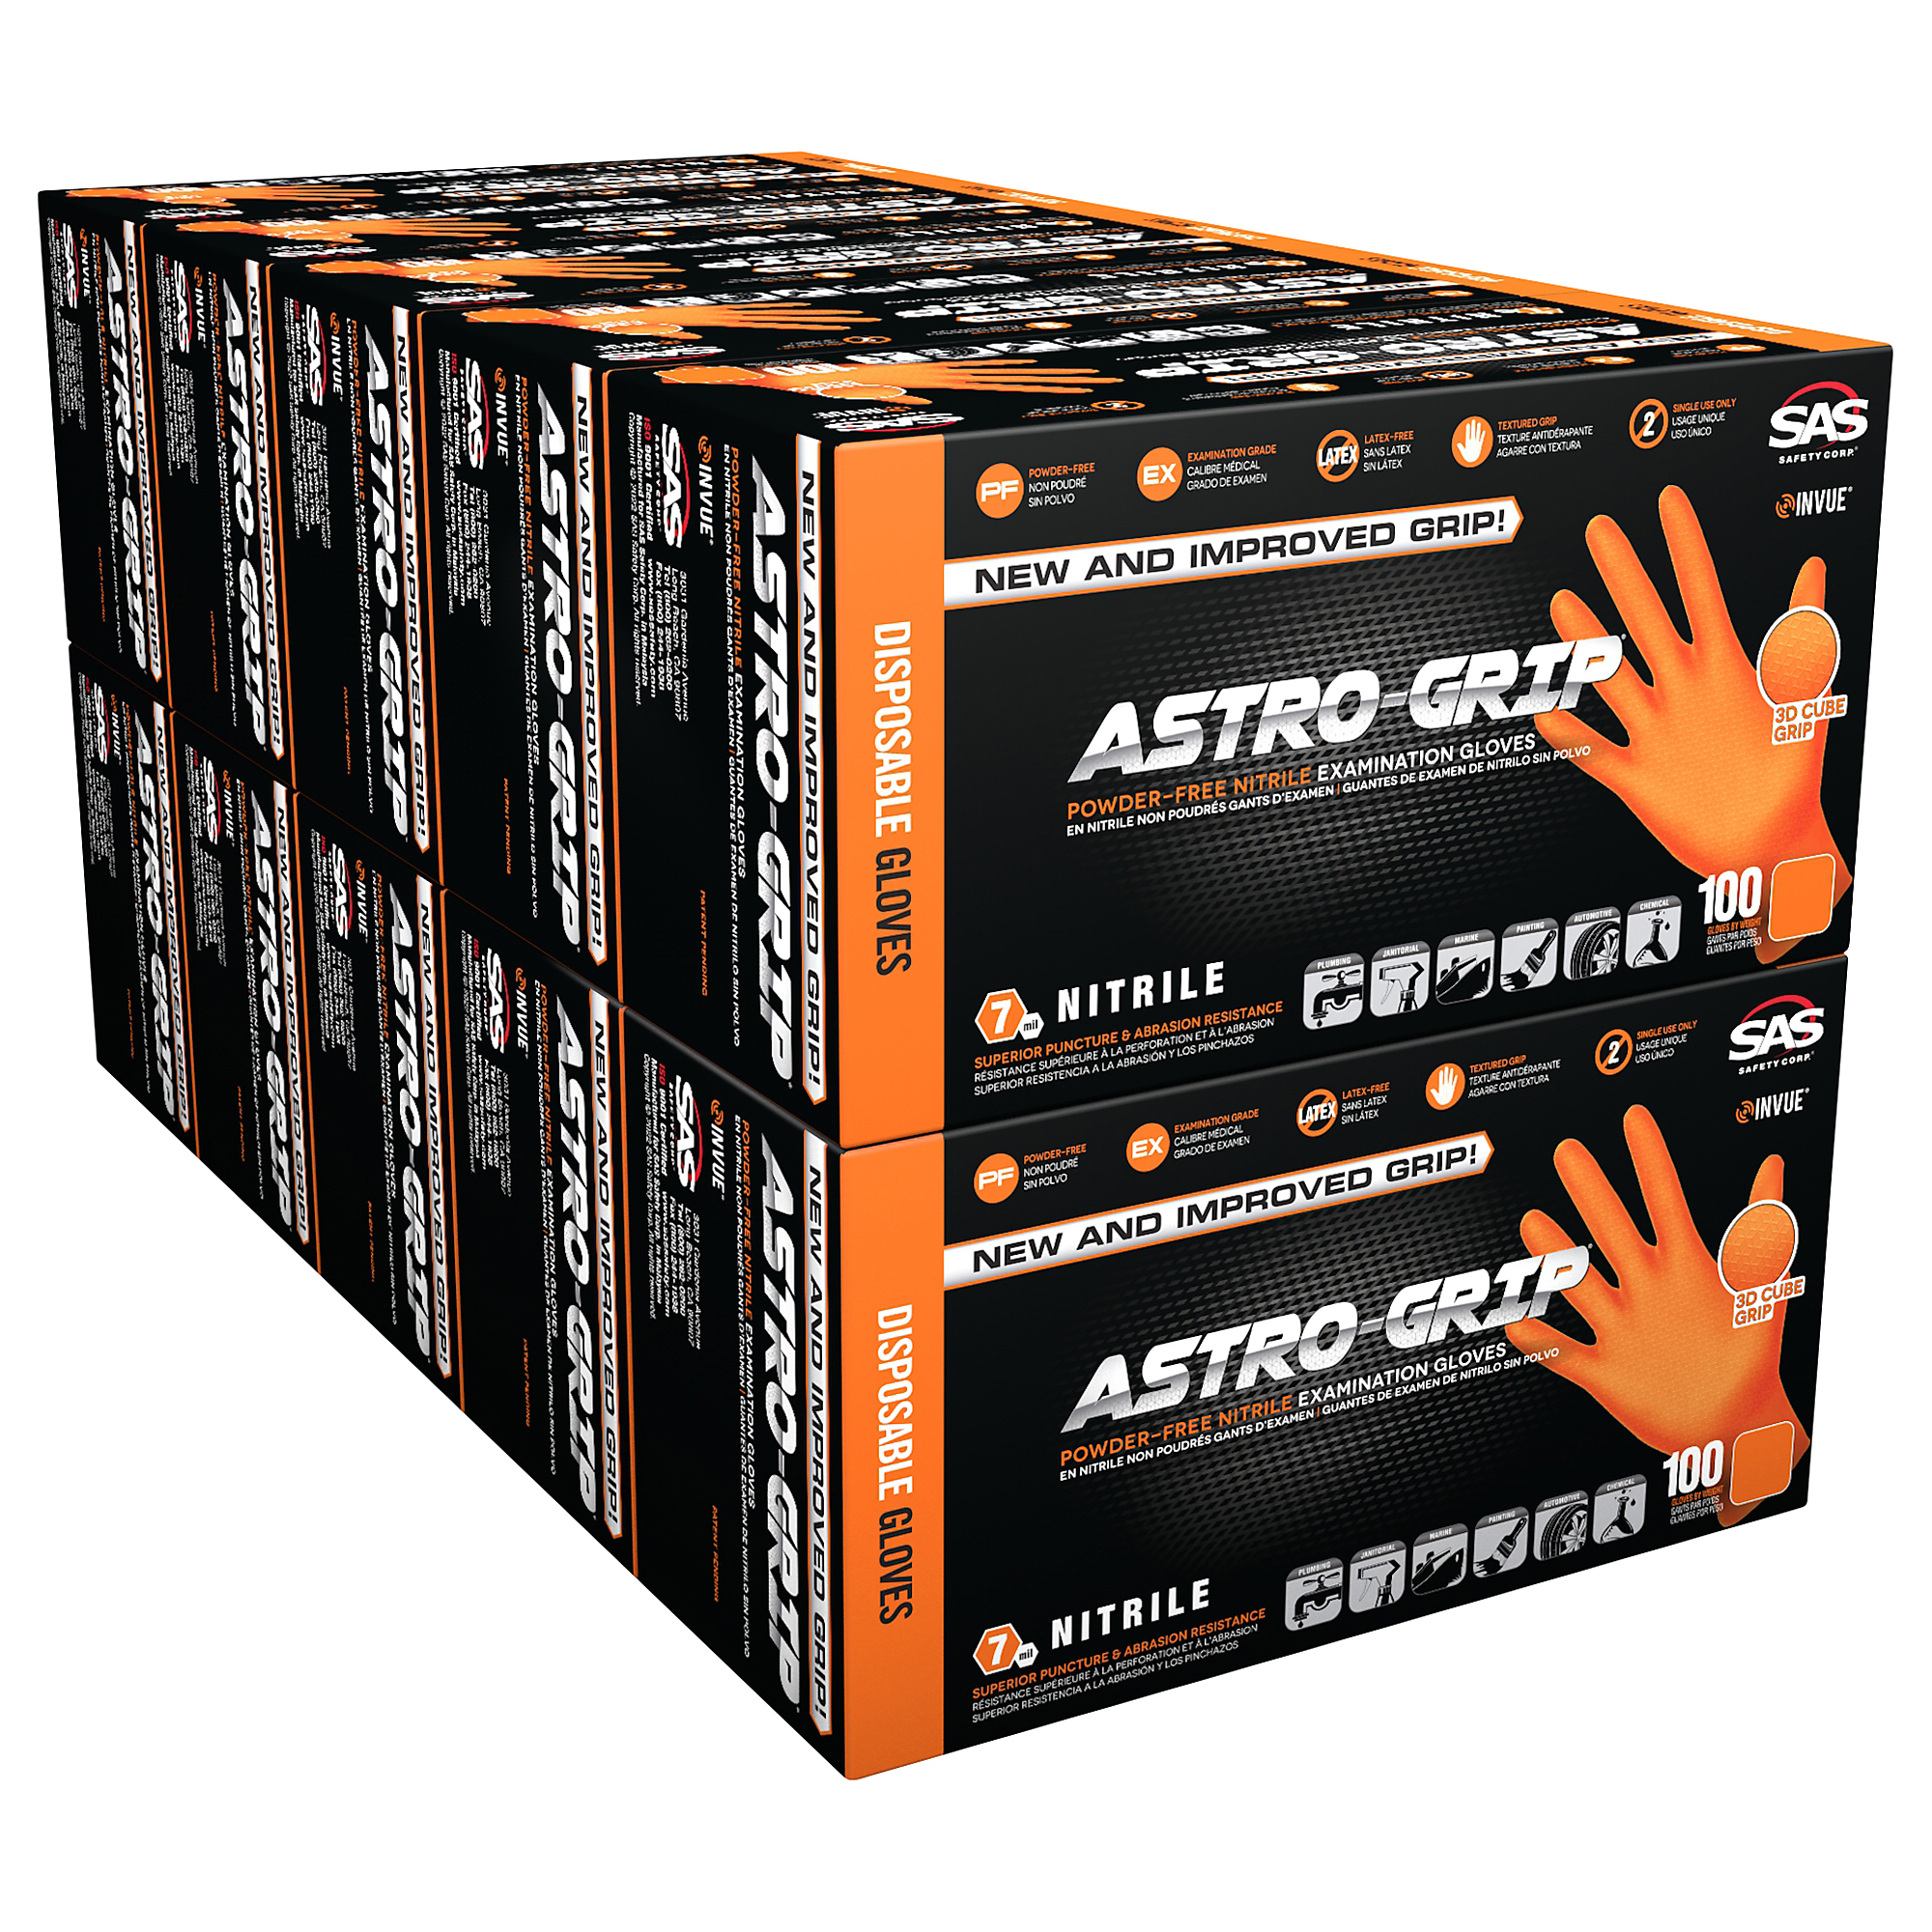 AstroGrip, 1000 Astro-Grip Disposable Gloves PF Nitrile 7mil, Size M, Color Orange, Included (qty.) 1000 Model 66472CASE